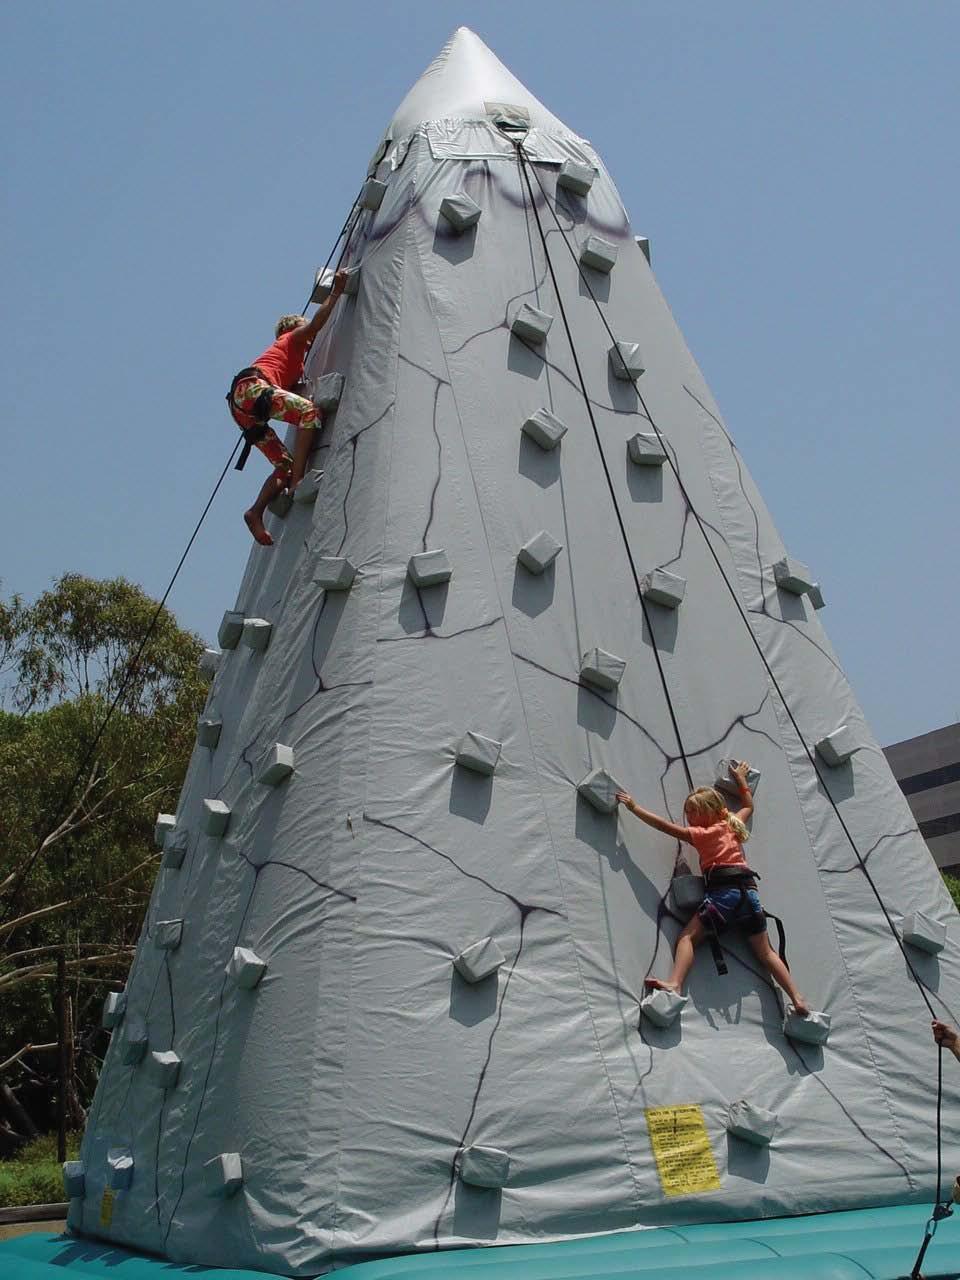 Ask for details*** Rocky Mountain Climbing Wall The multi-sided inflatable rock wall is a spectacular 24 feet tall and offers 4 separate climbing routes from beginner to expert climber.